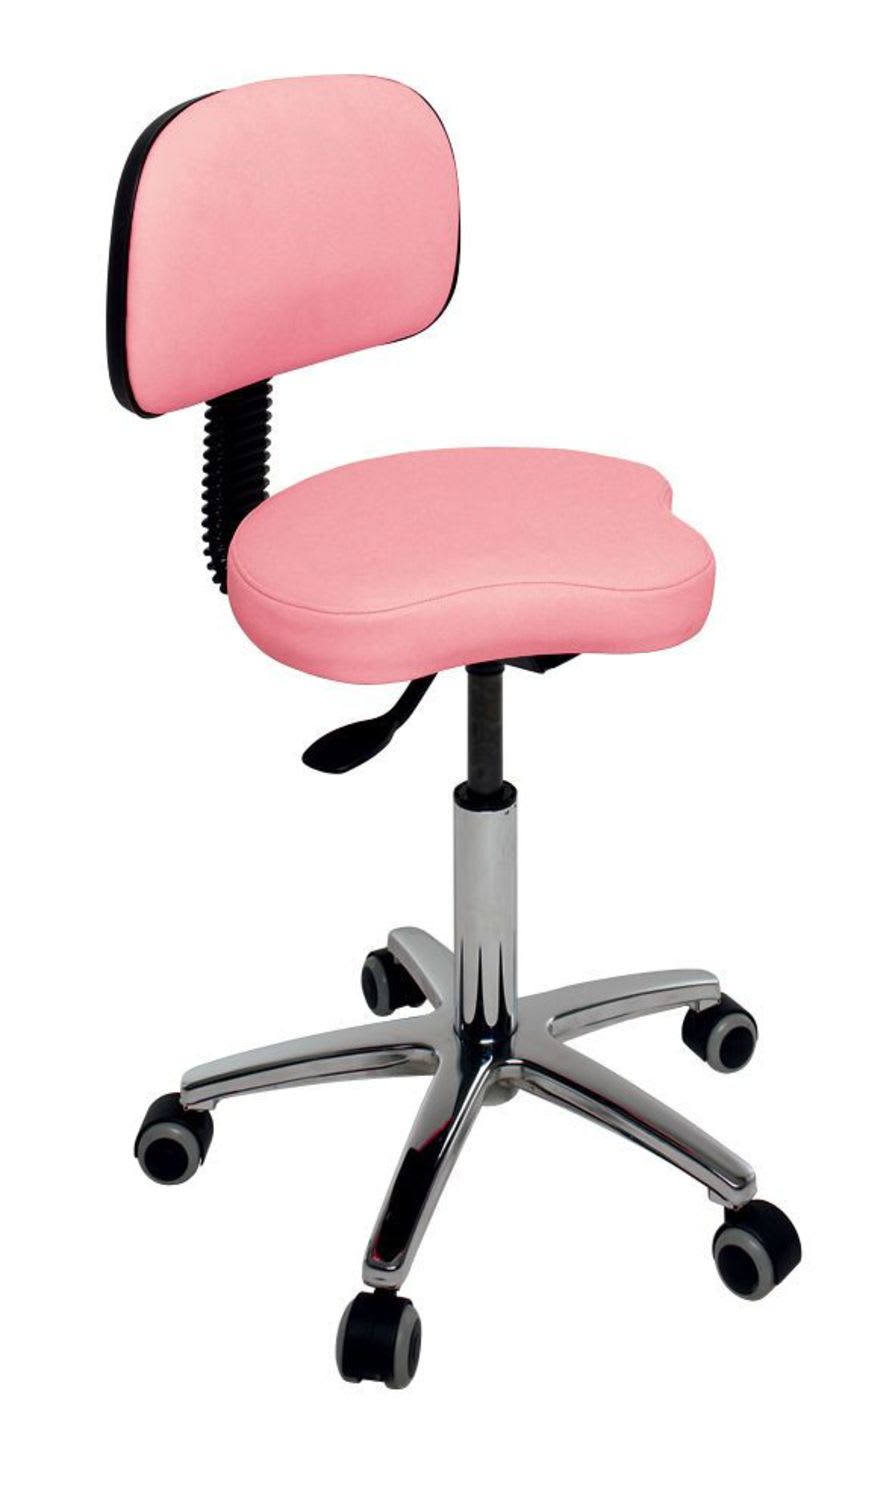 Medical stool / height-adjustable / on casters / T seat S-4639 Ecopostural